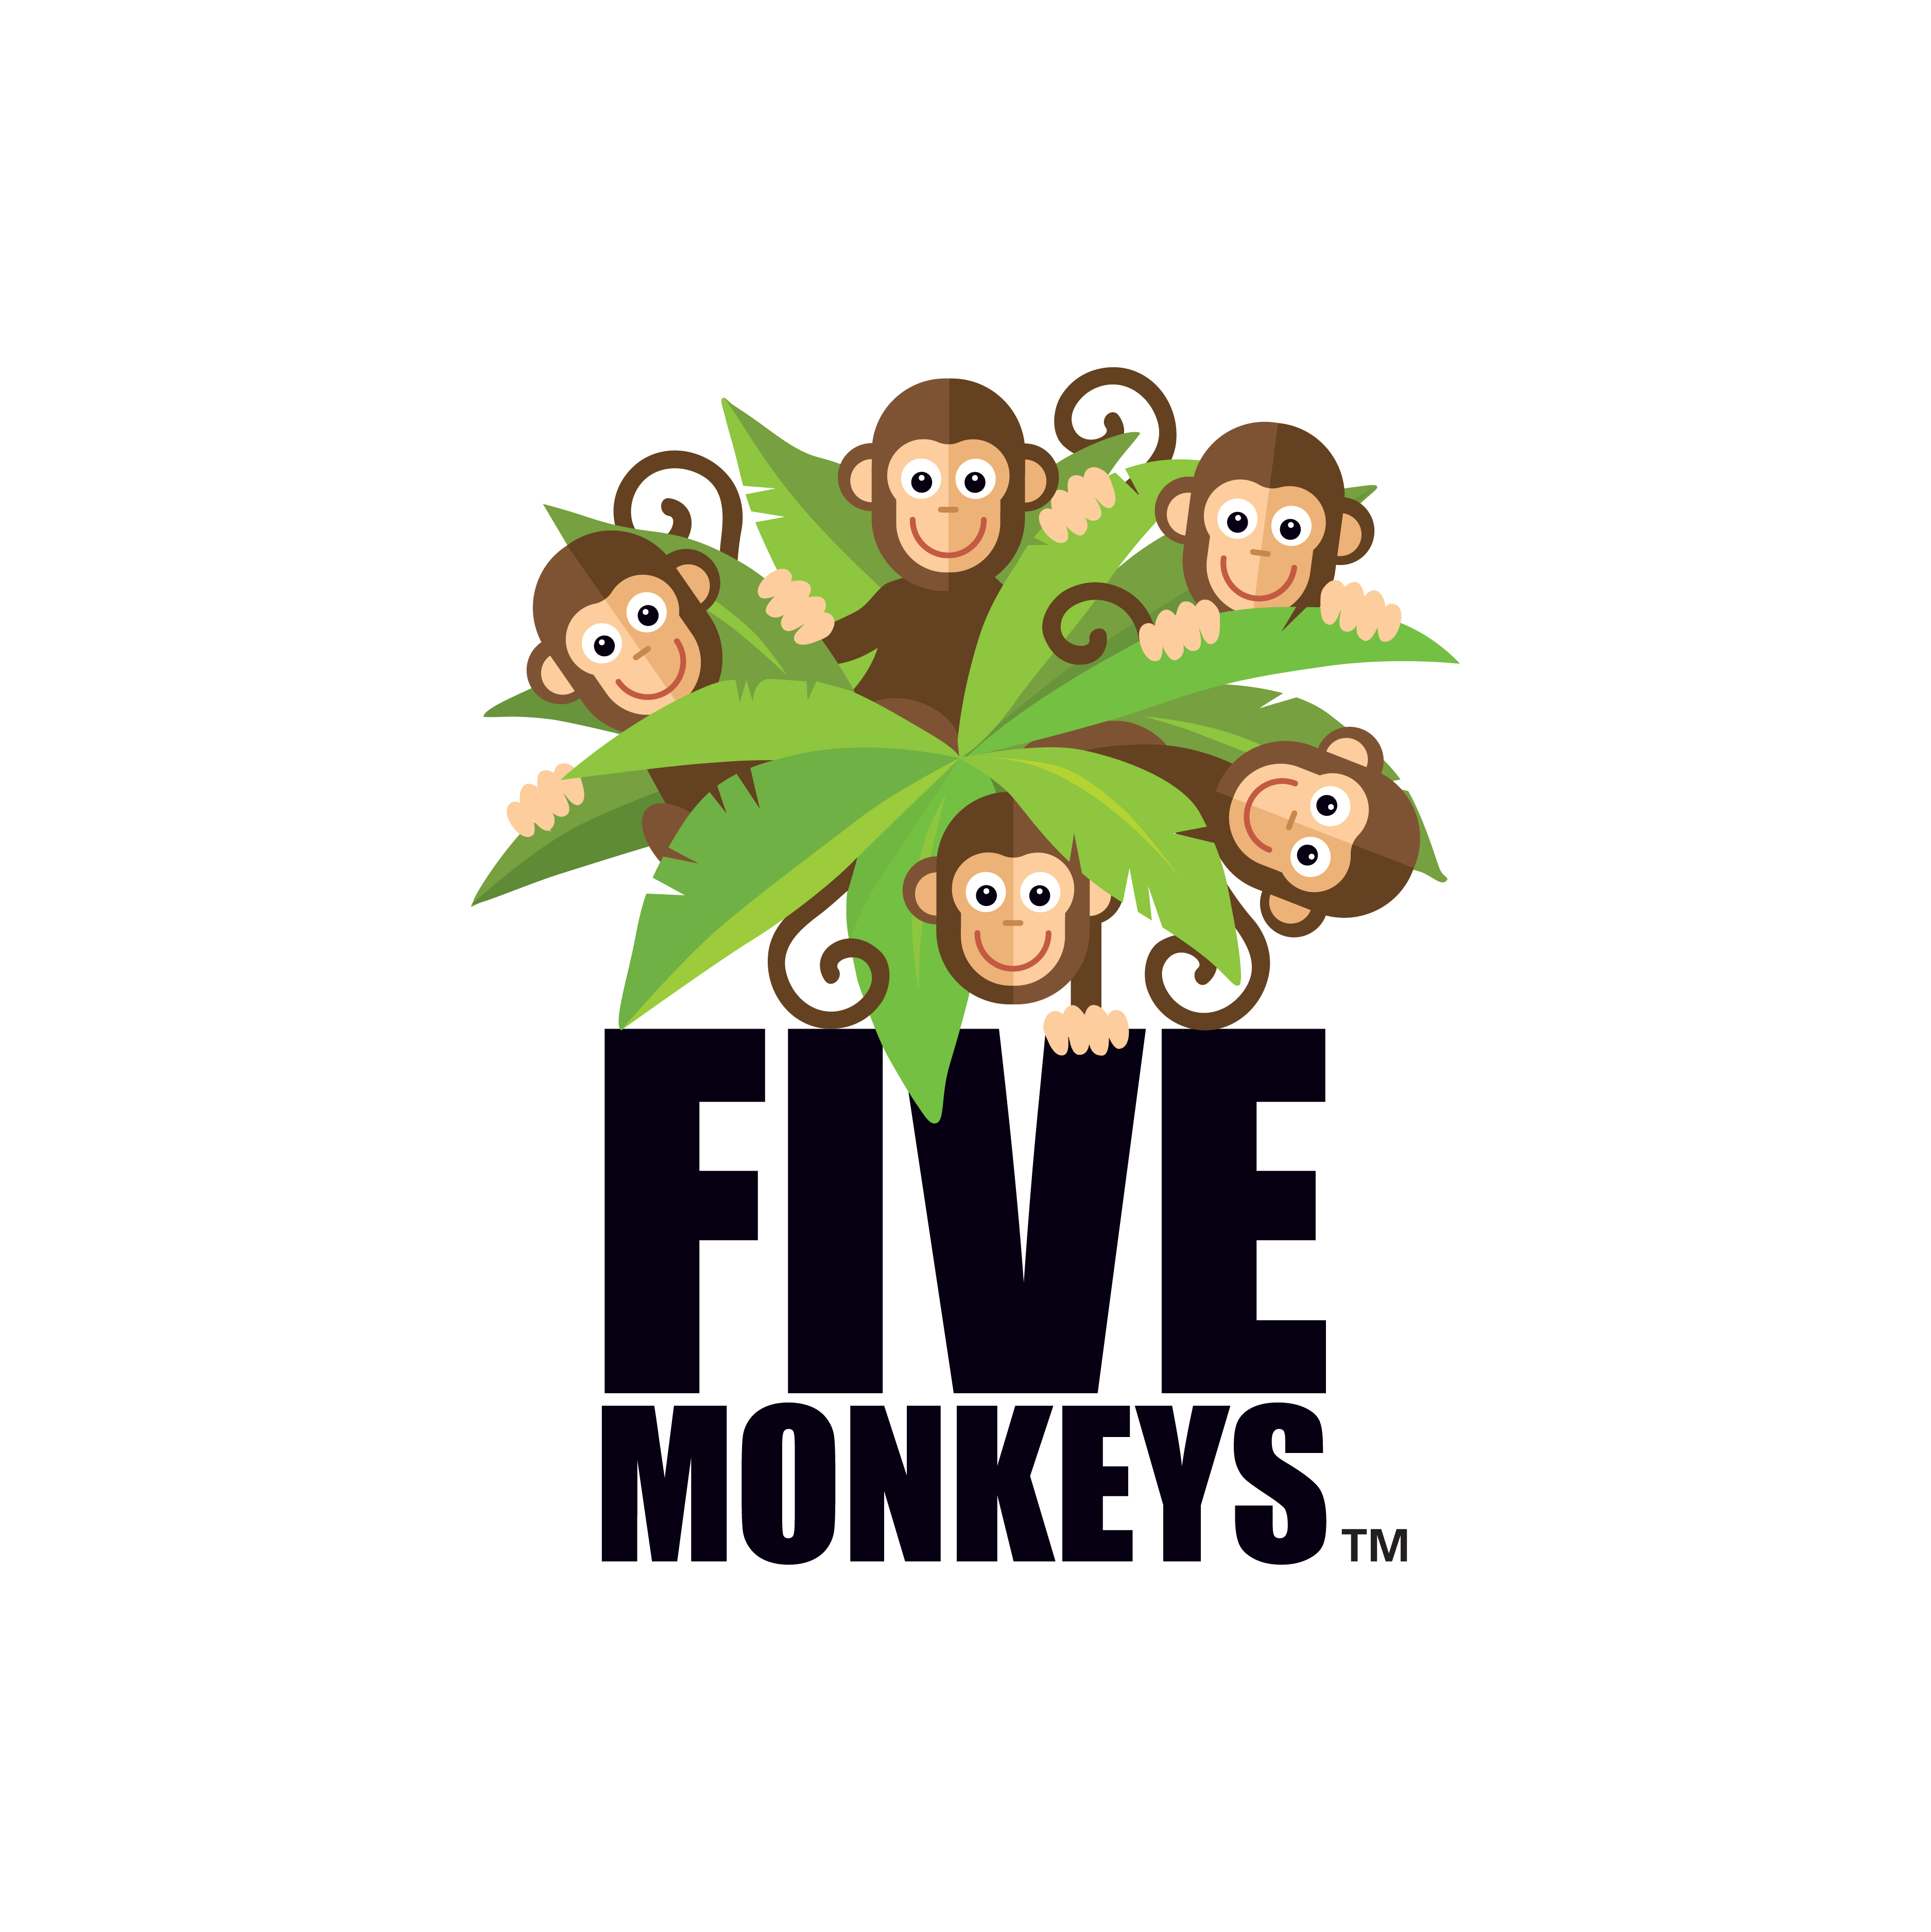 Five Monkeys logo design by logo designer MHD Group for your inspiration and for the worlds largest logo competition